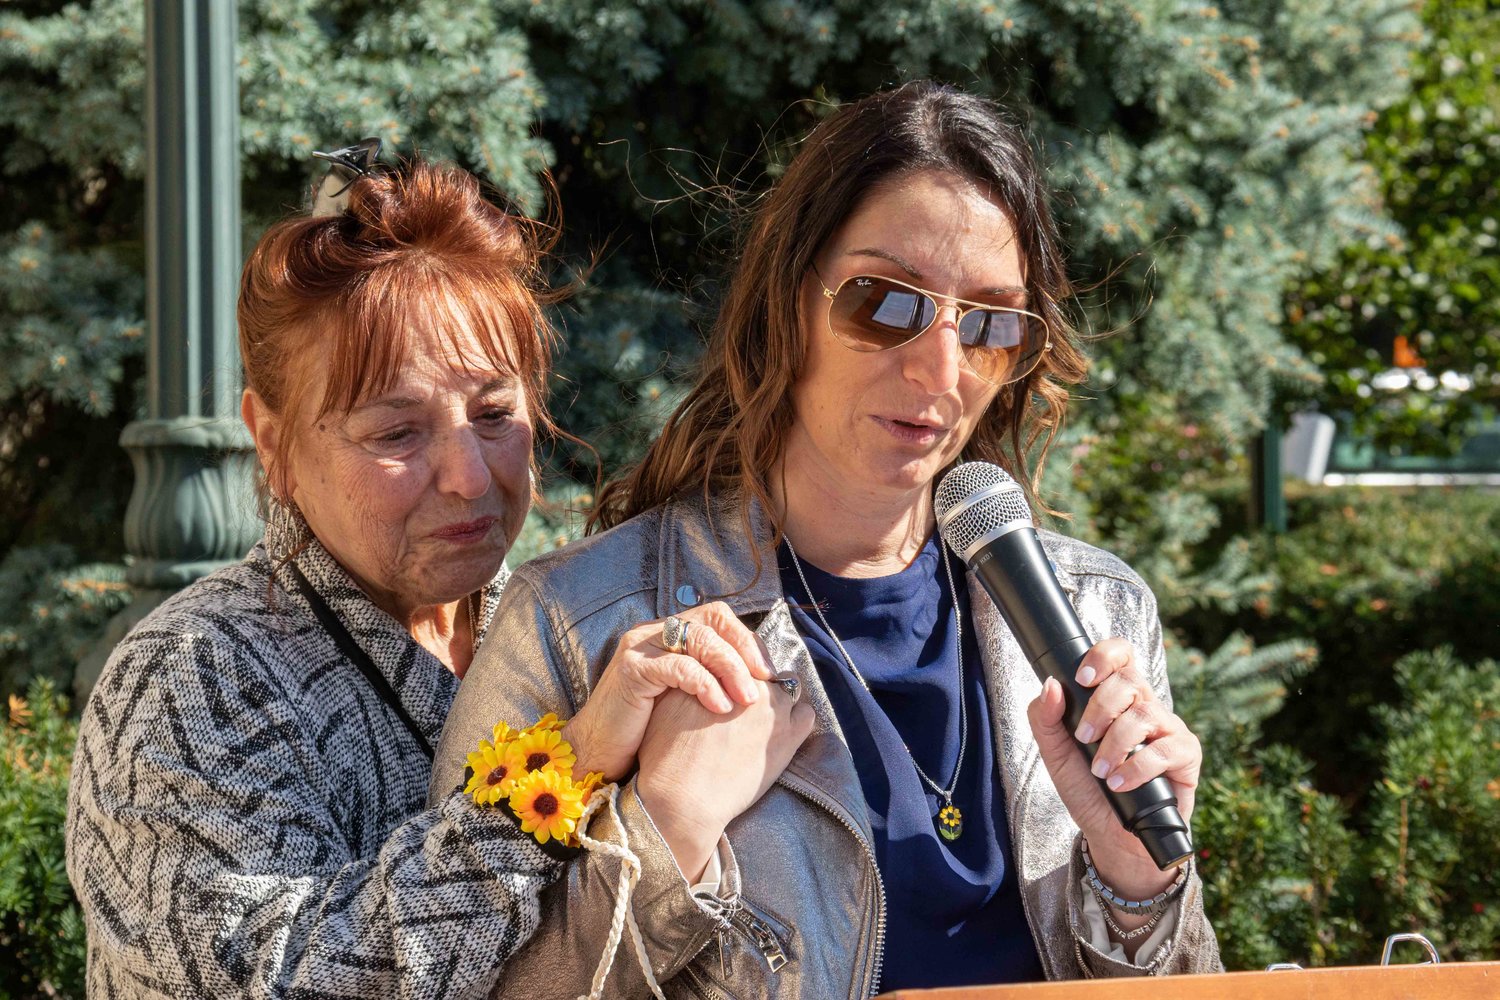 It was an emotional event for Viki’s mother and sister, Rosemarie and Nicole Sorrentino.